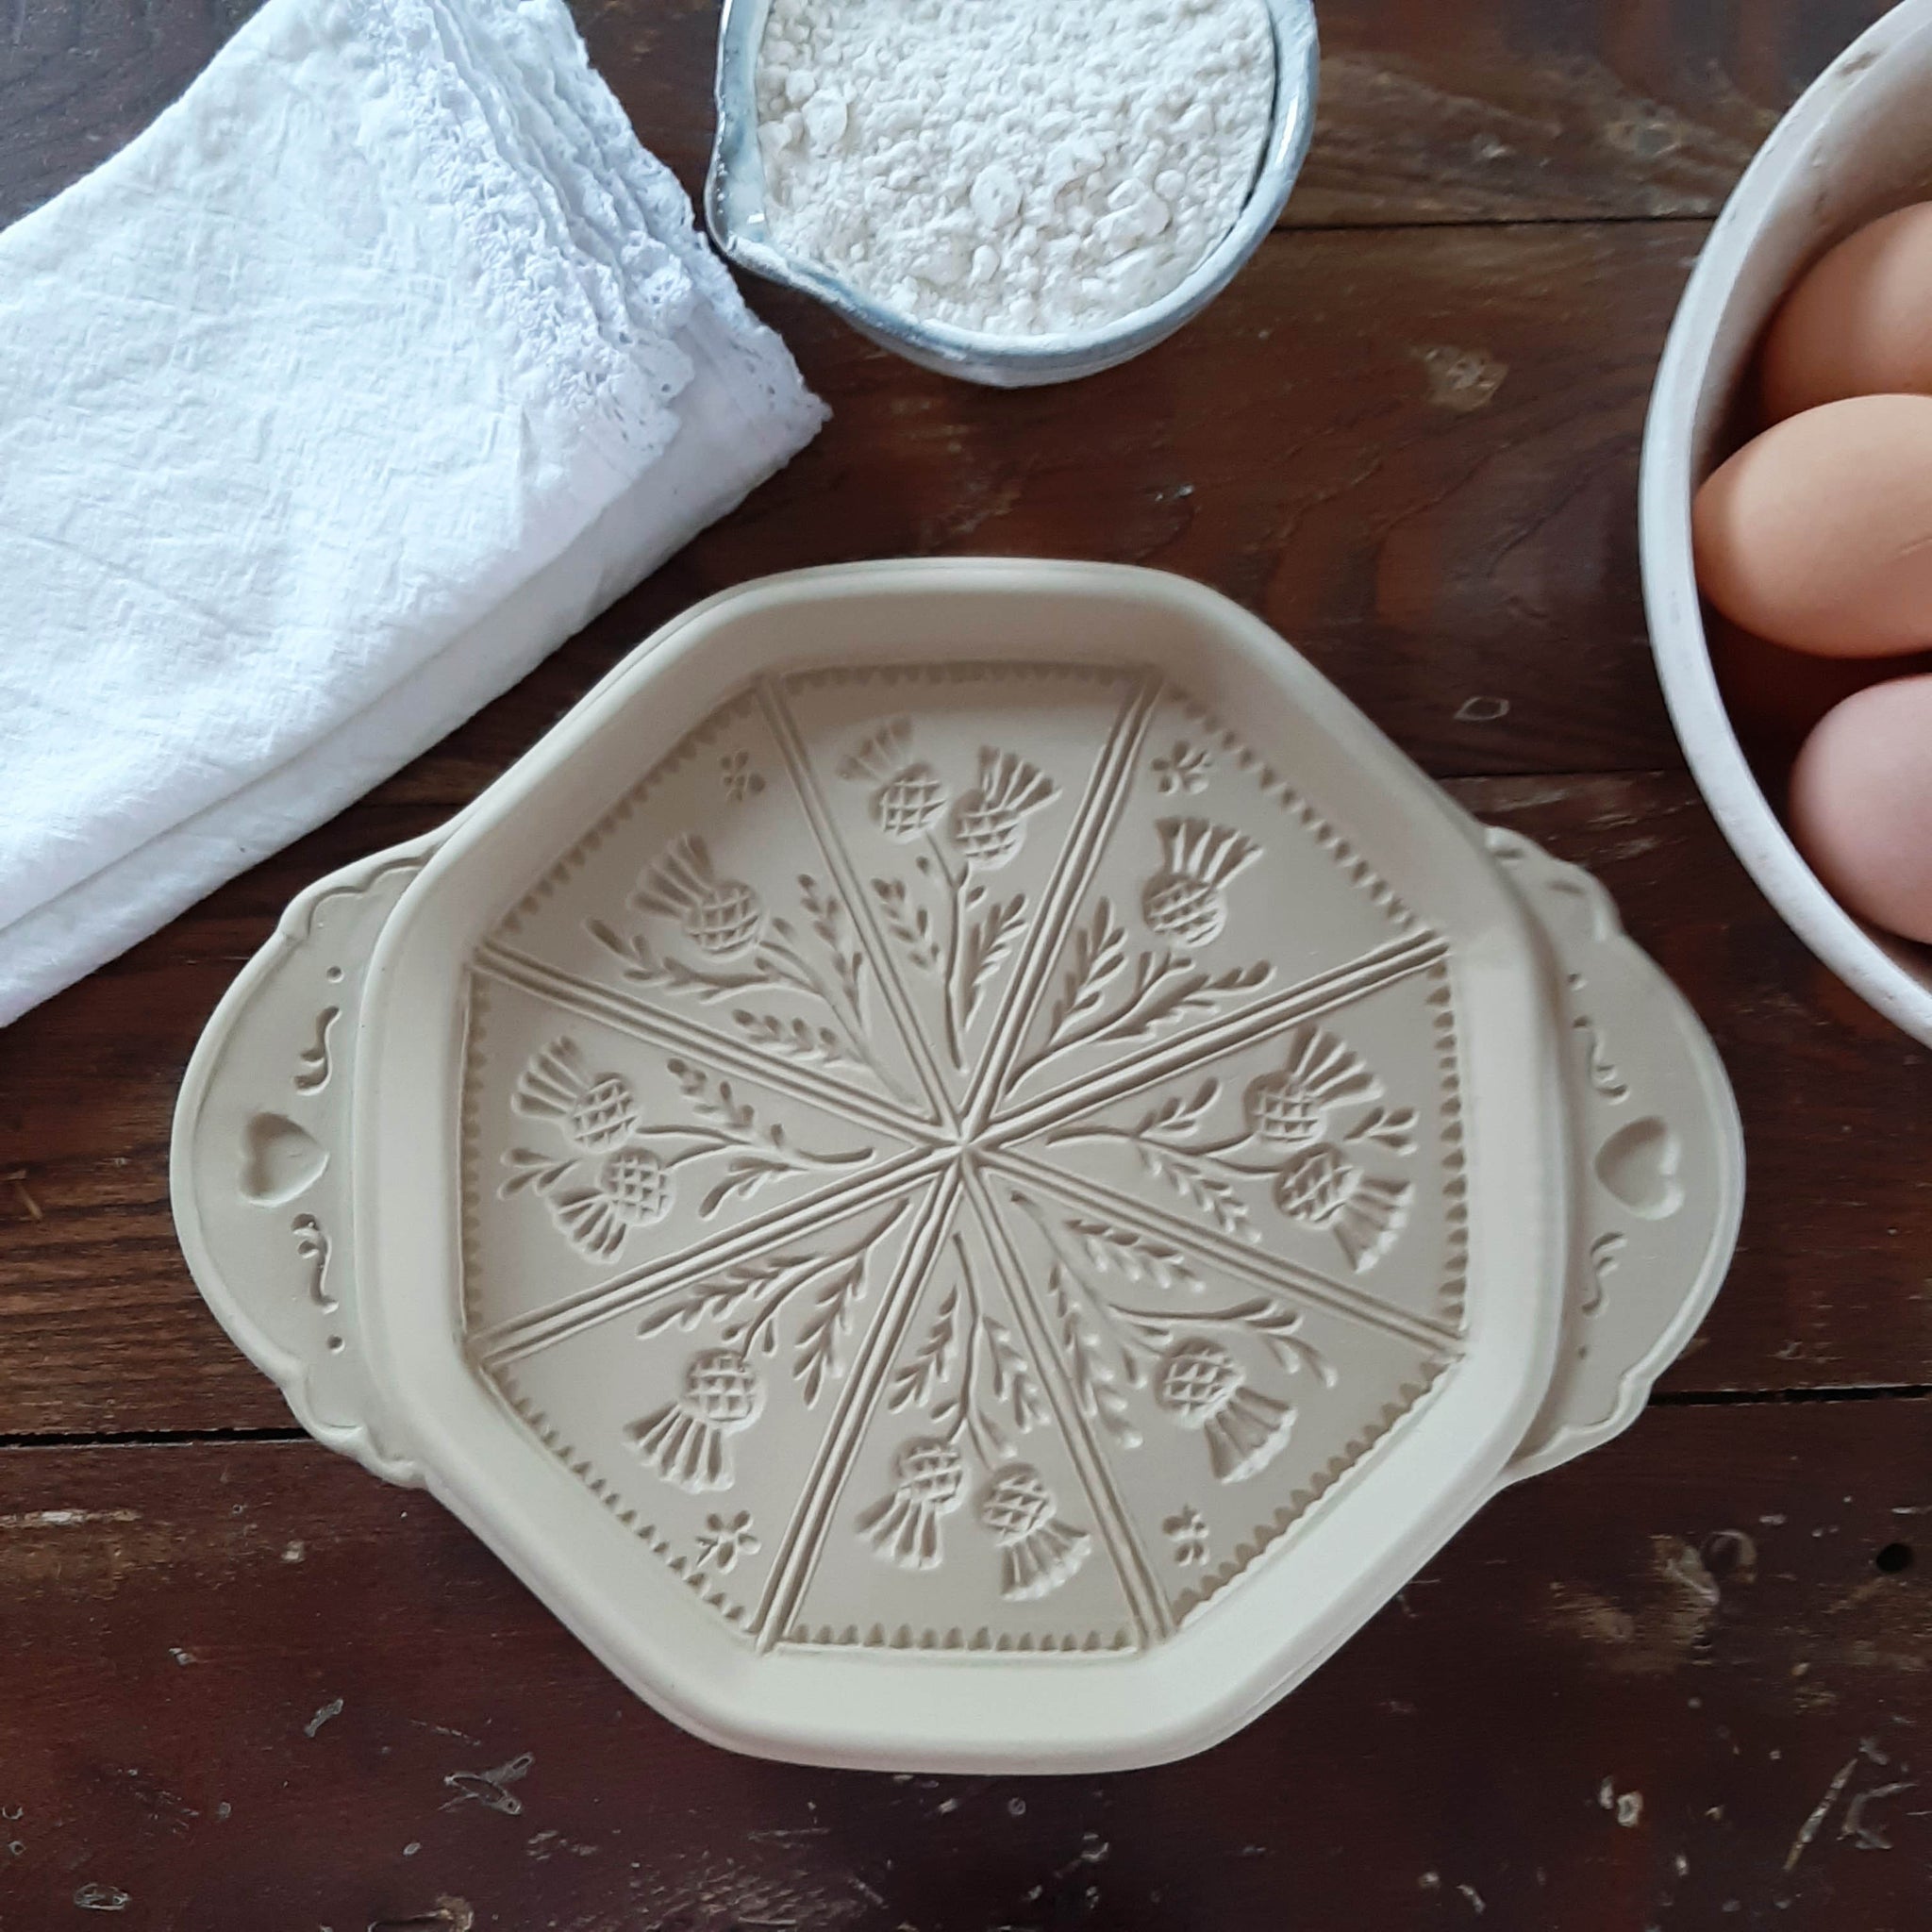 Shortbread Baking stone - 8 mould with thistle pattern 